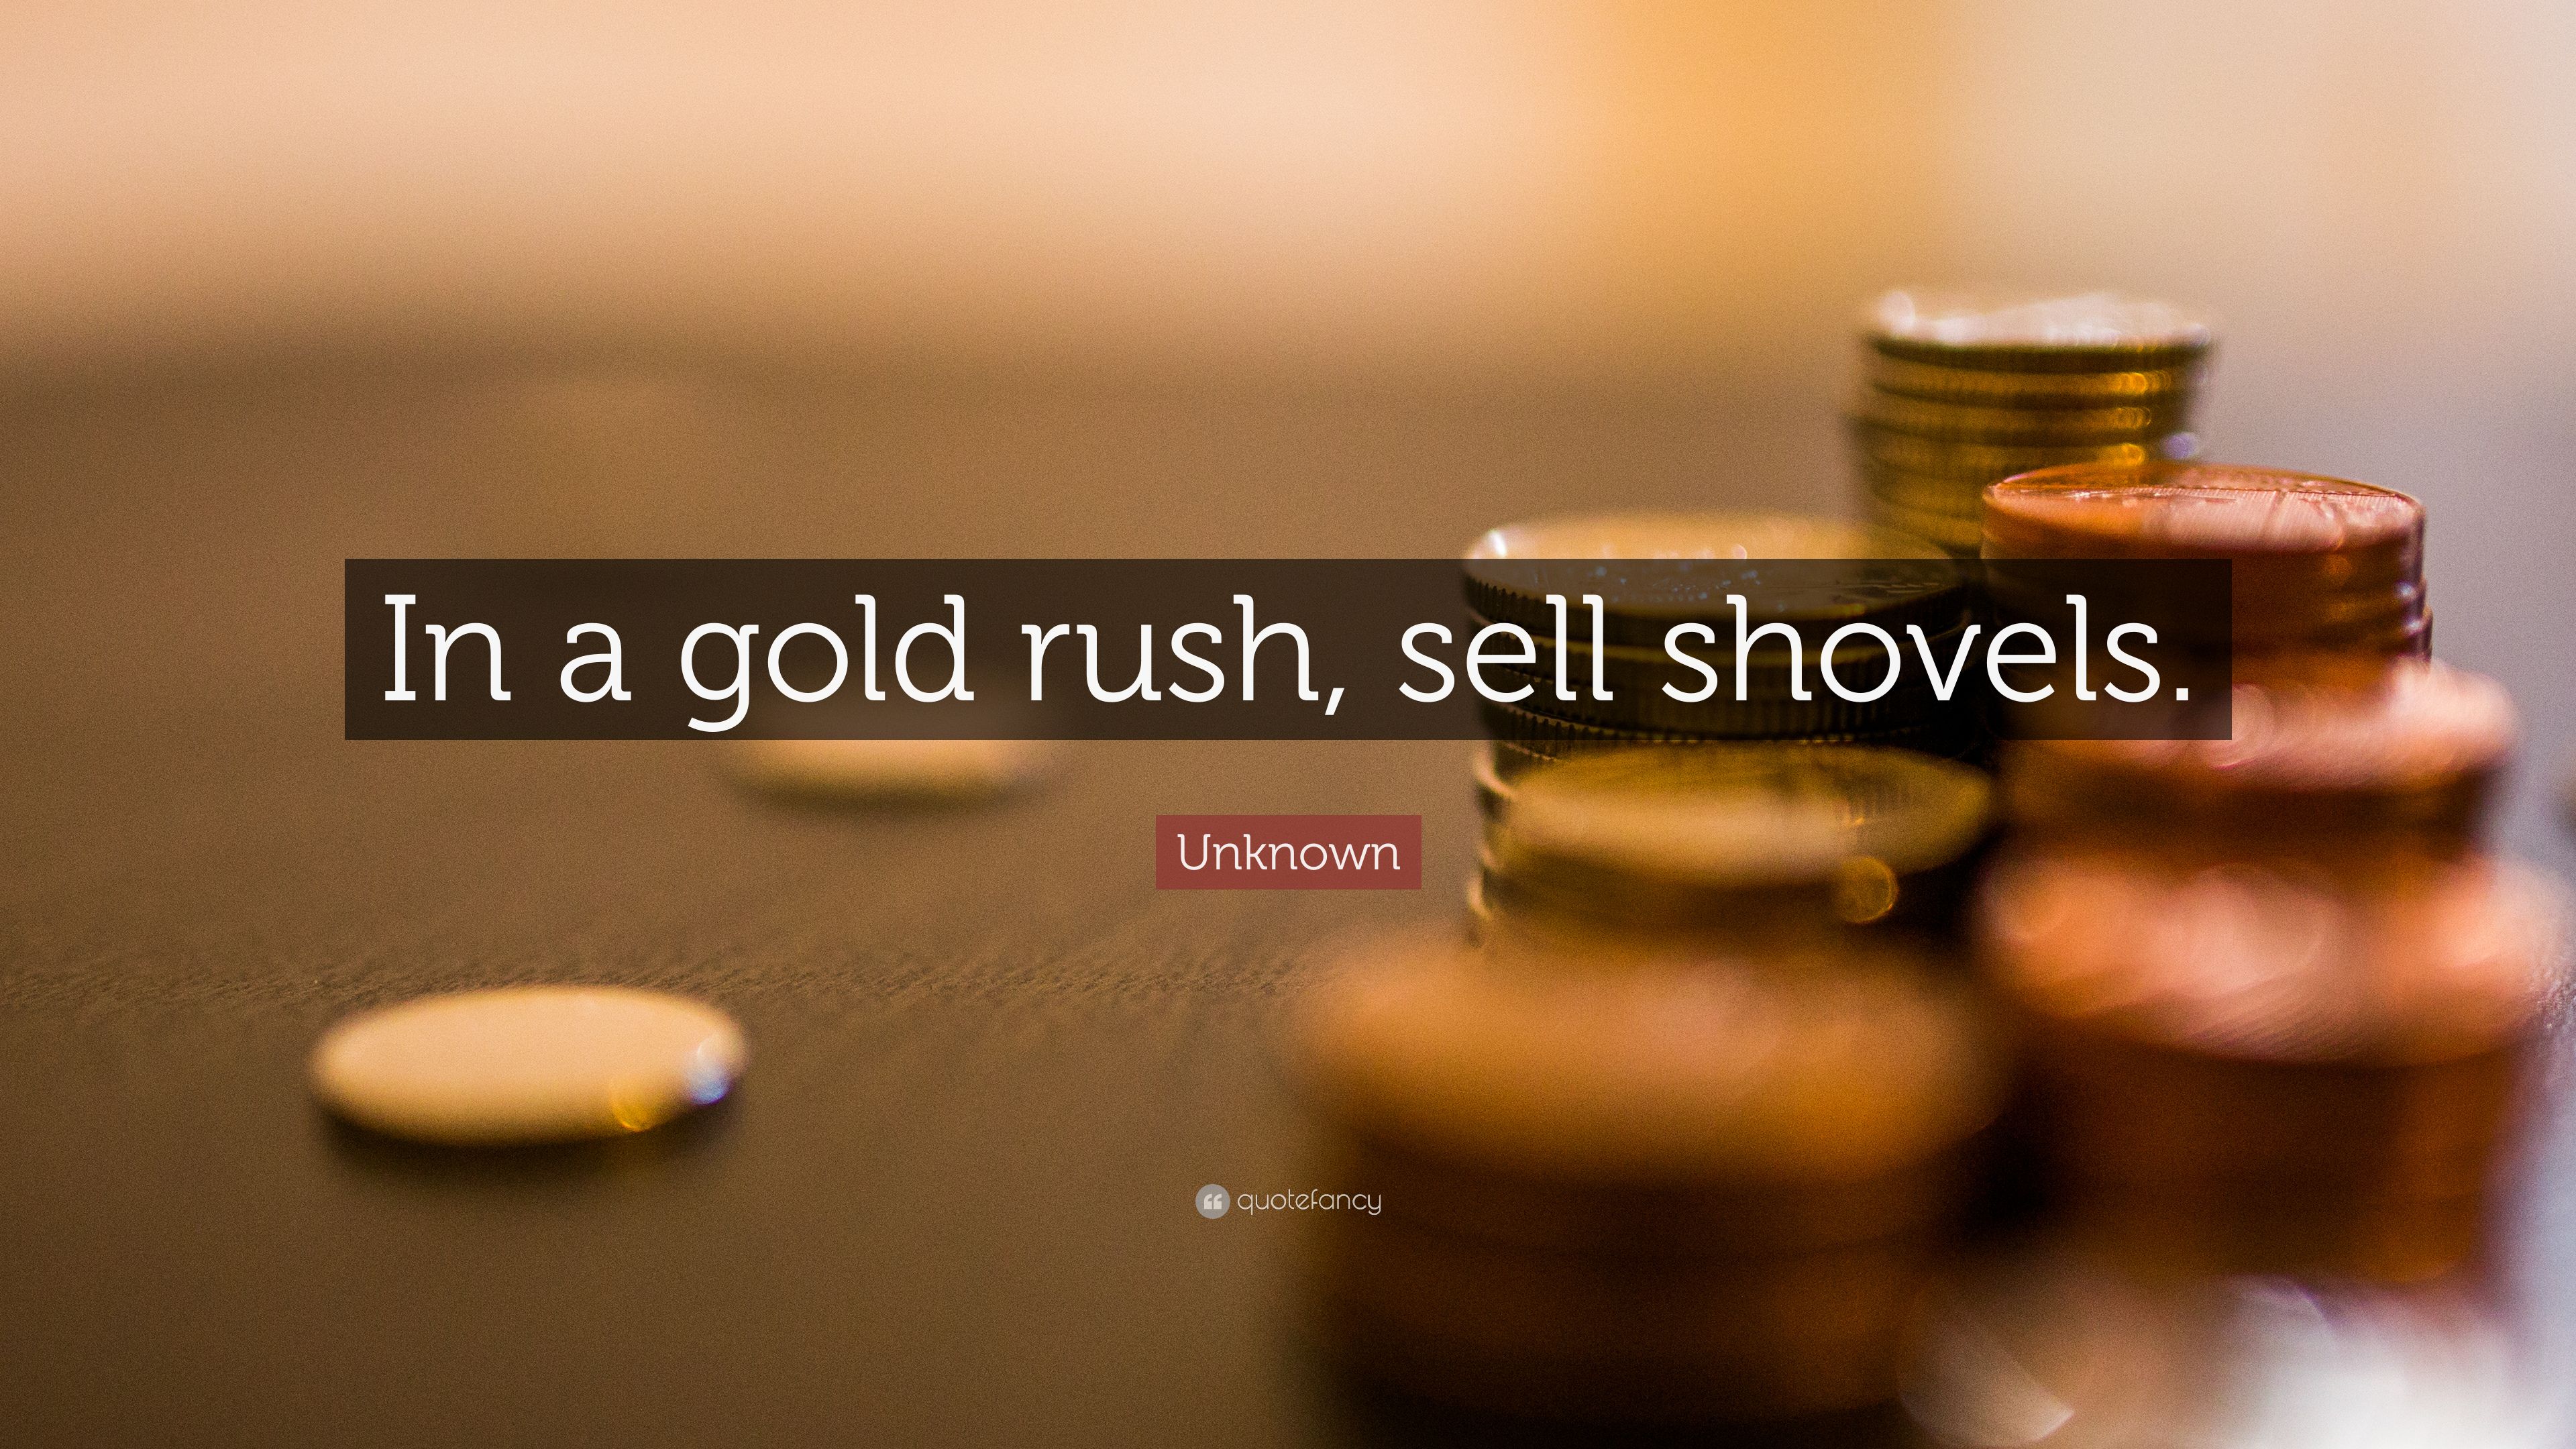 Unknown Quote: “In a gold rush, sell shovels.” 6 wallpaper